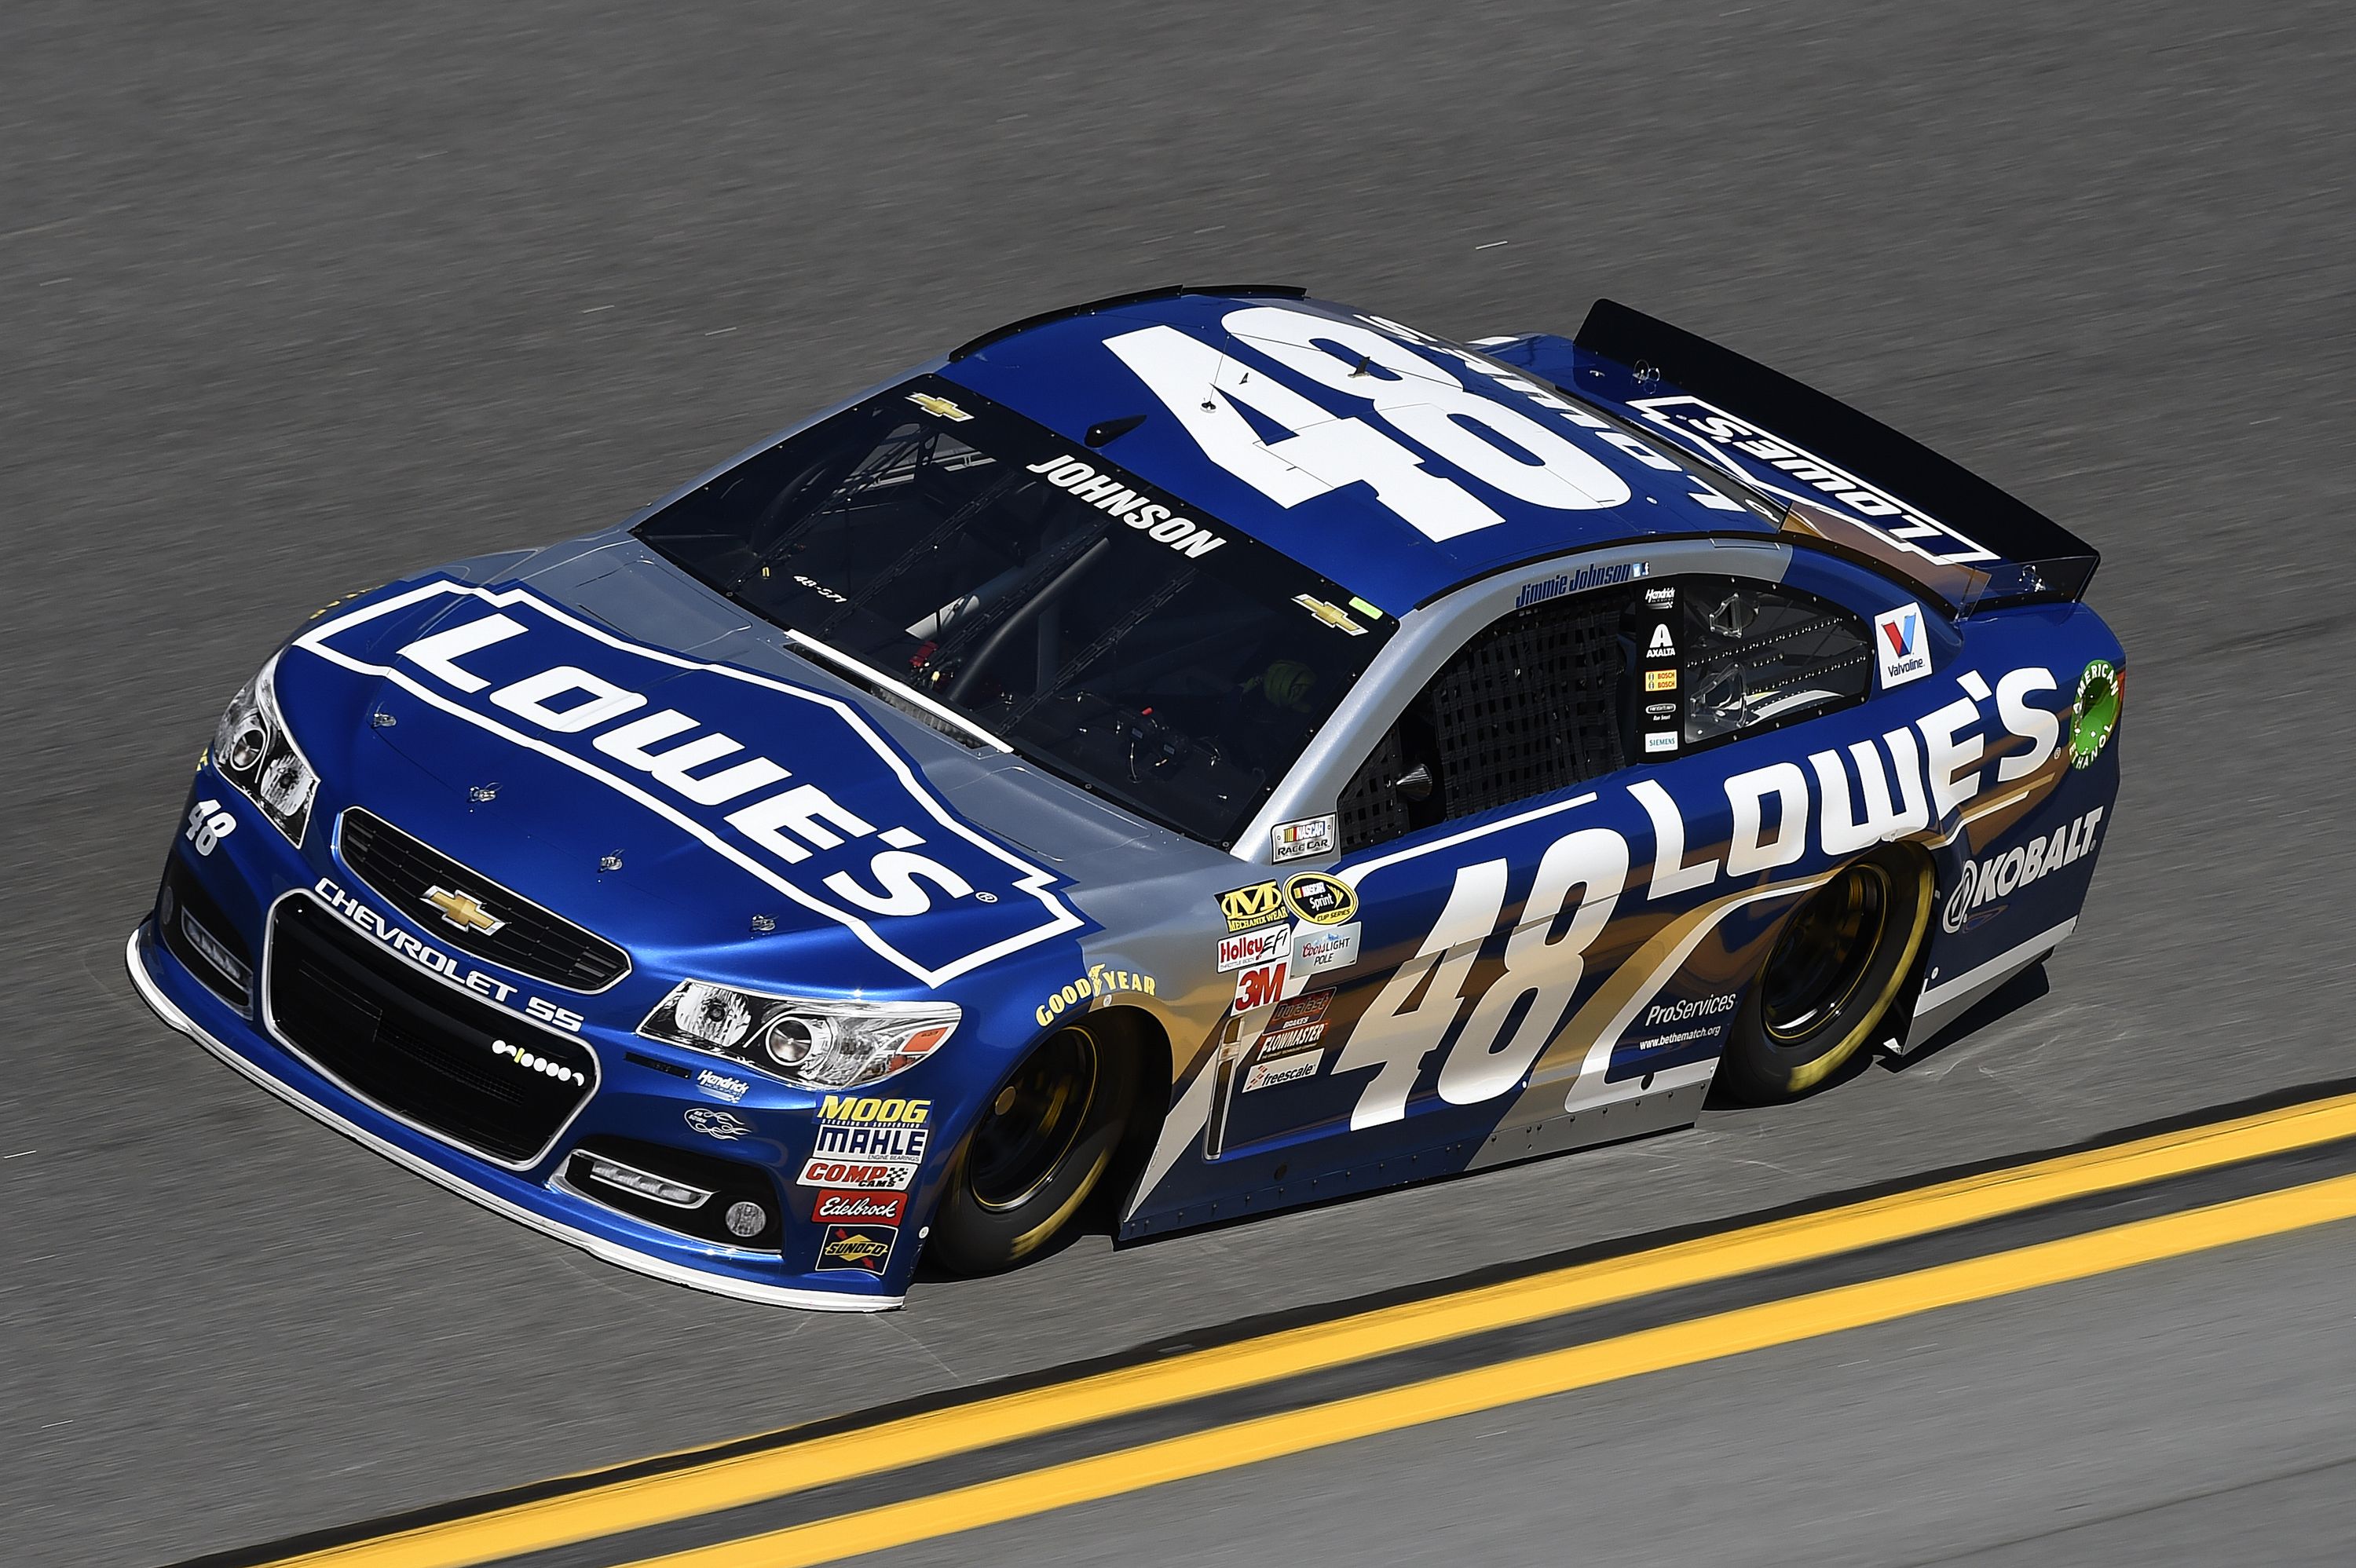 Complete lineups for 2015 Daytona Duels qualifying races